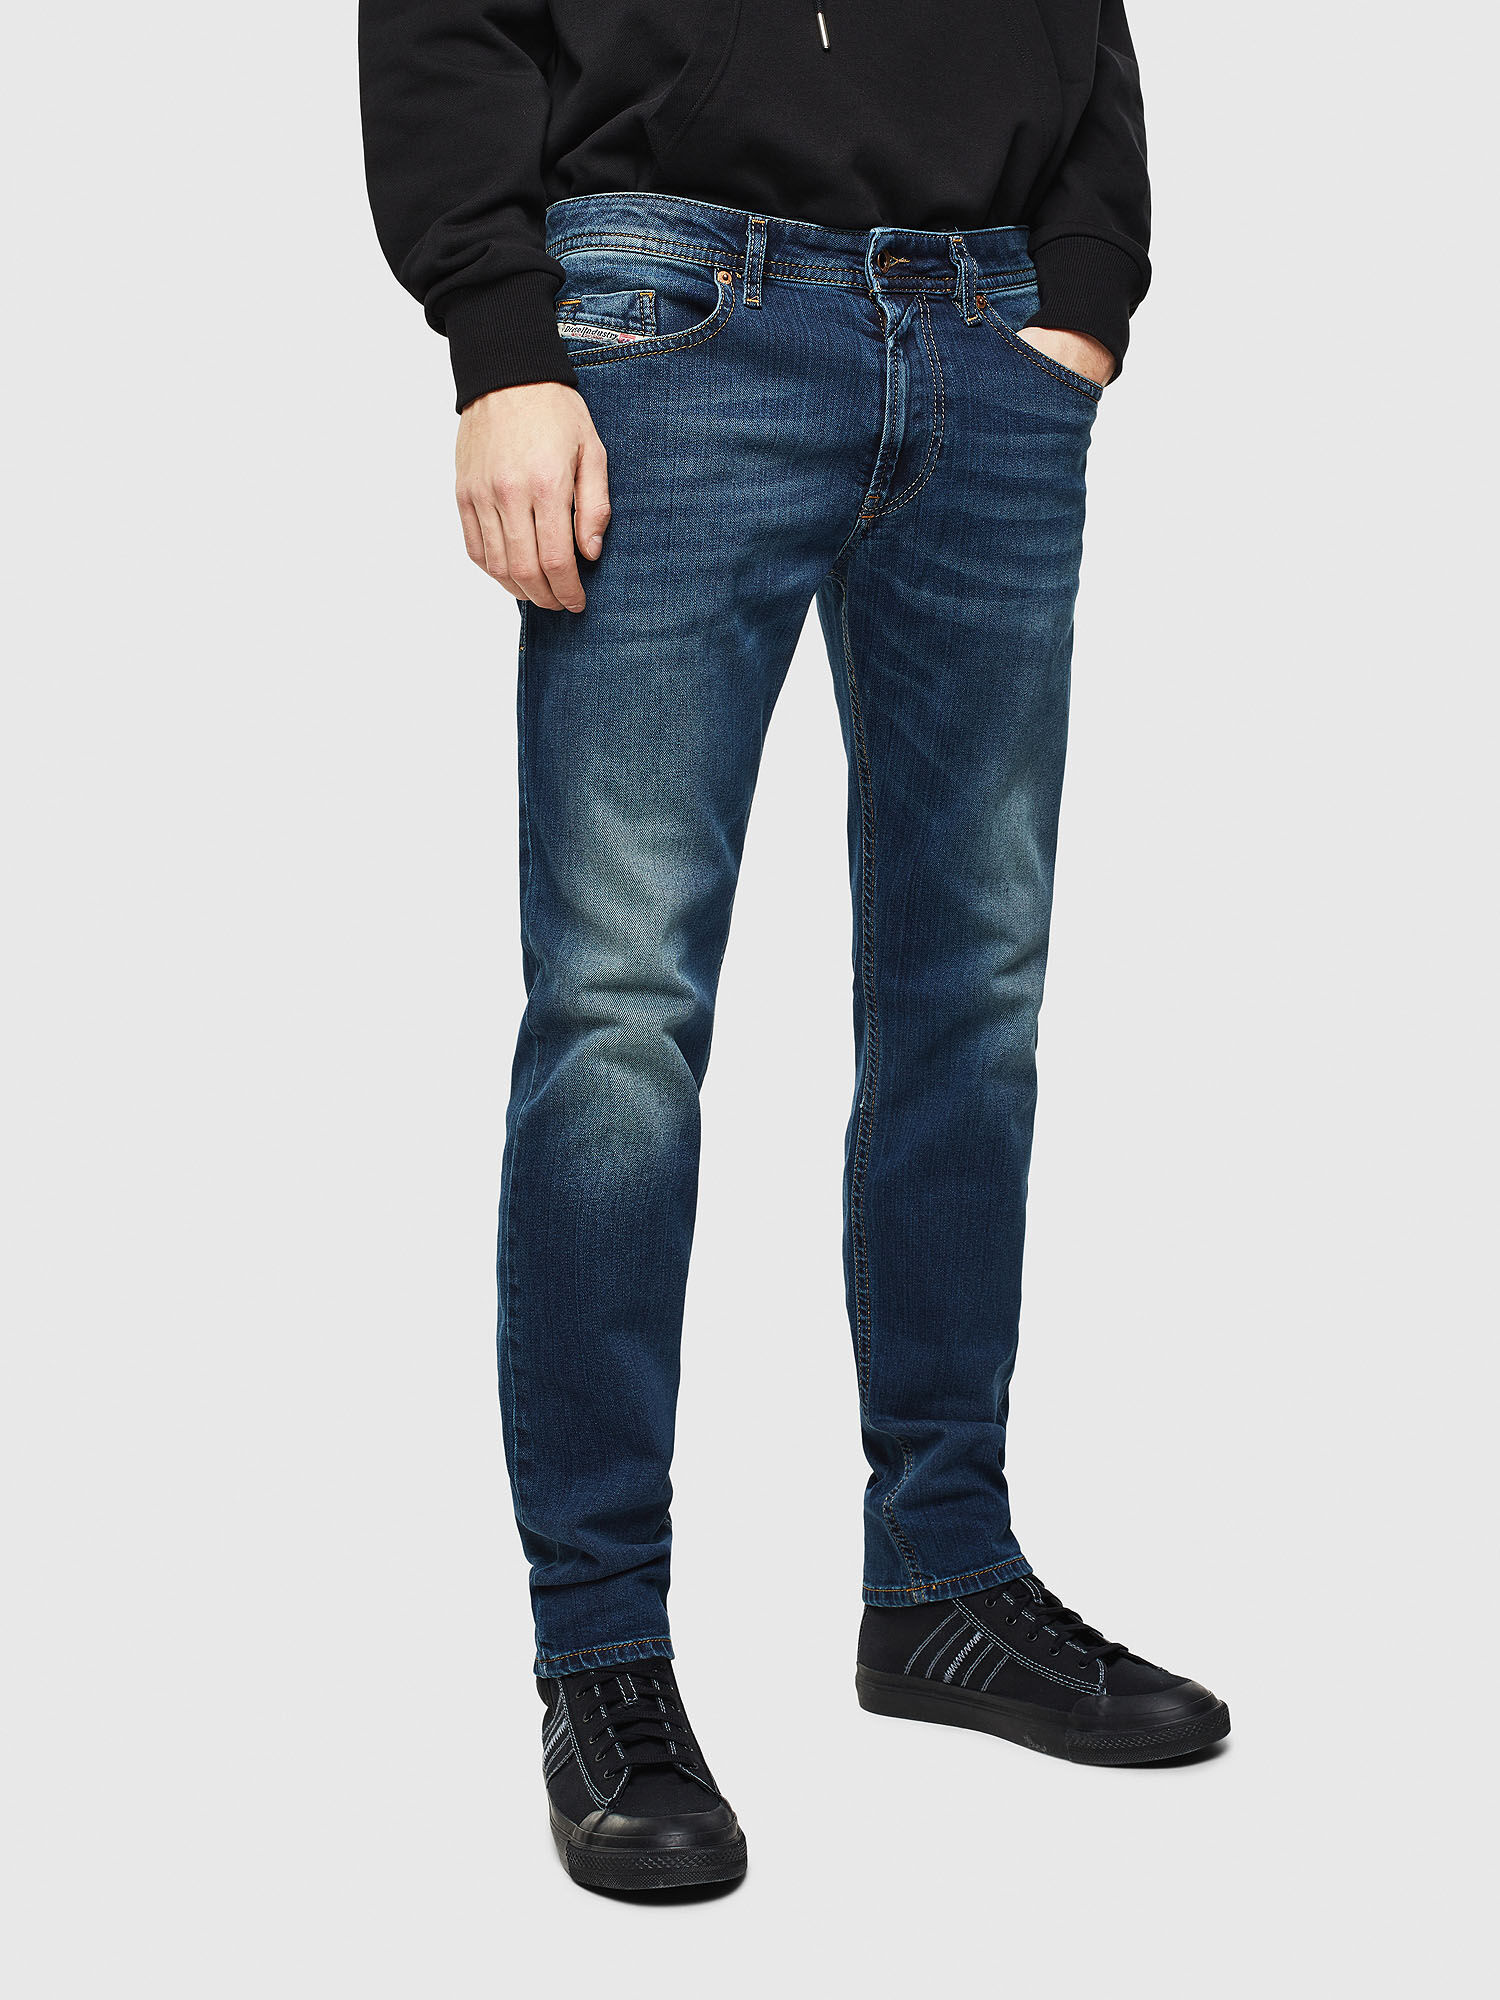 levi 501 button fly mens jeans